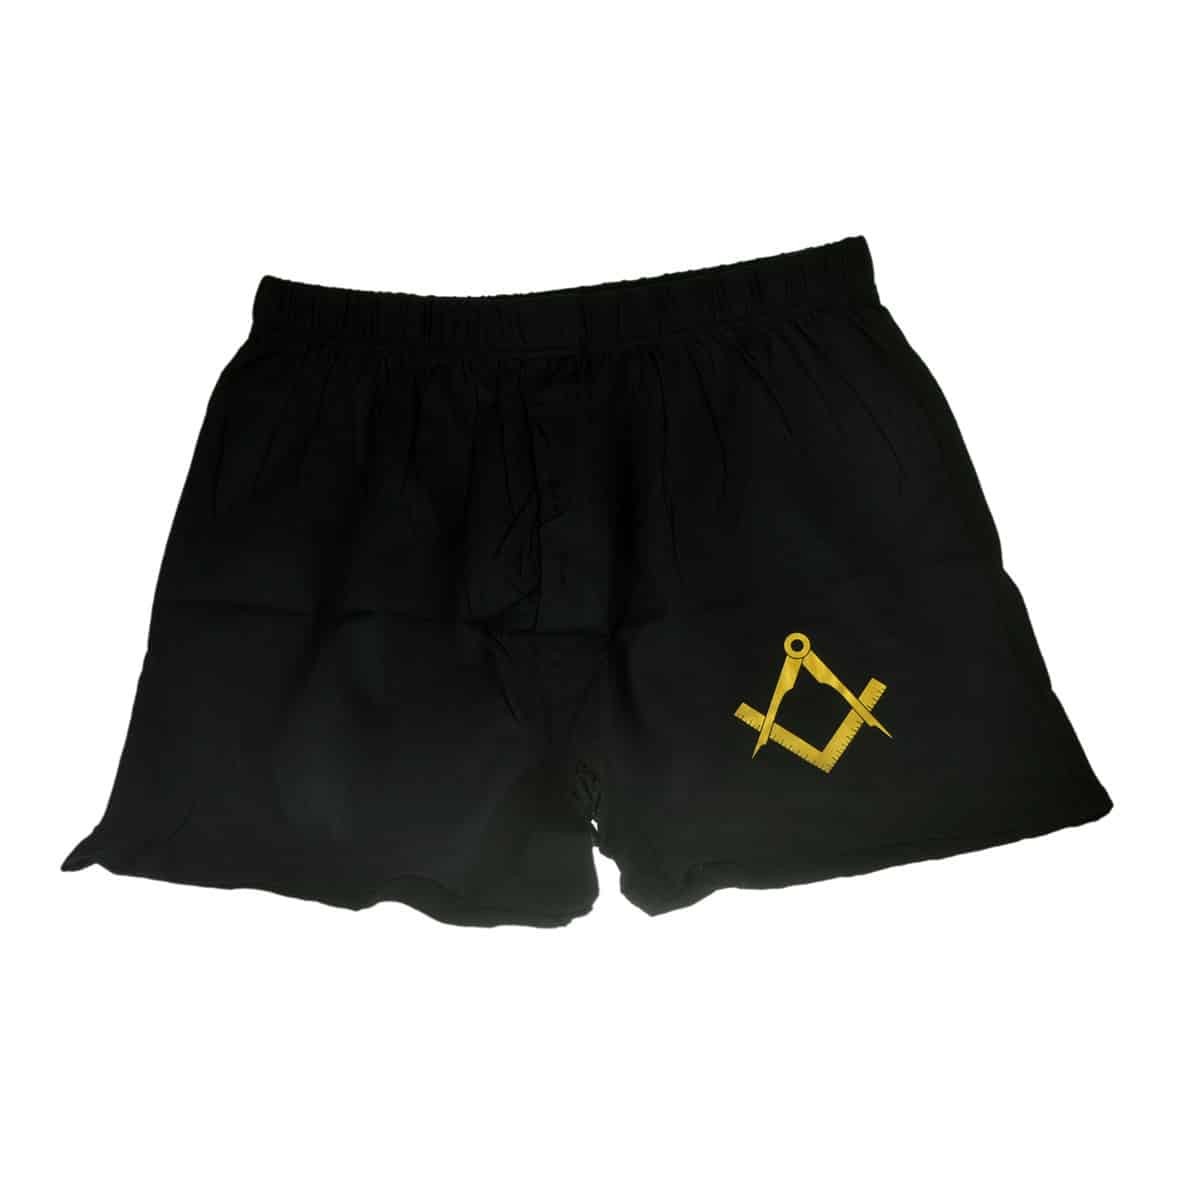 Masonic Boxer Shorts with Gold Design available with or without G ...